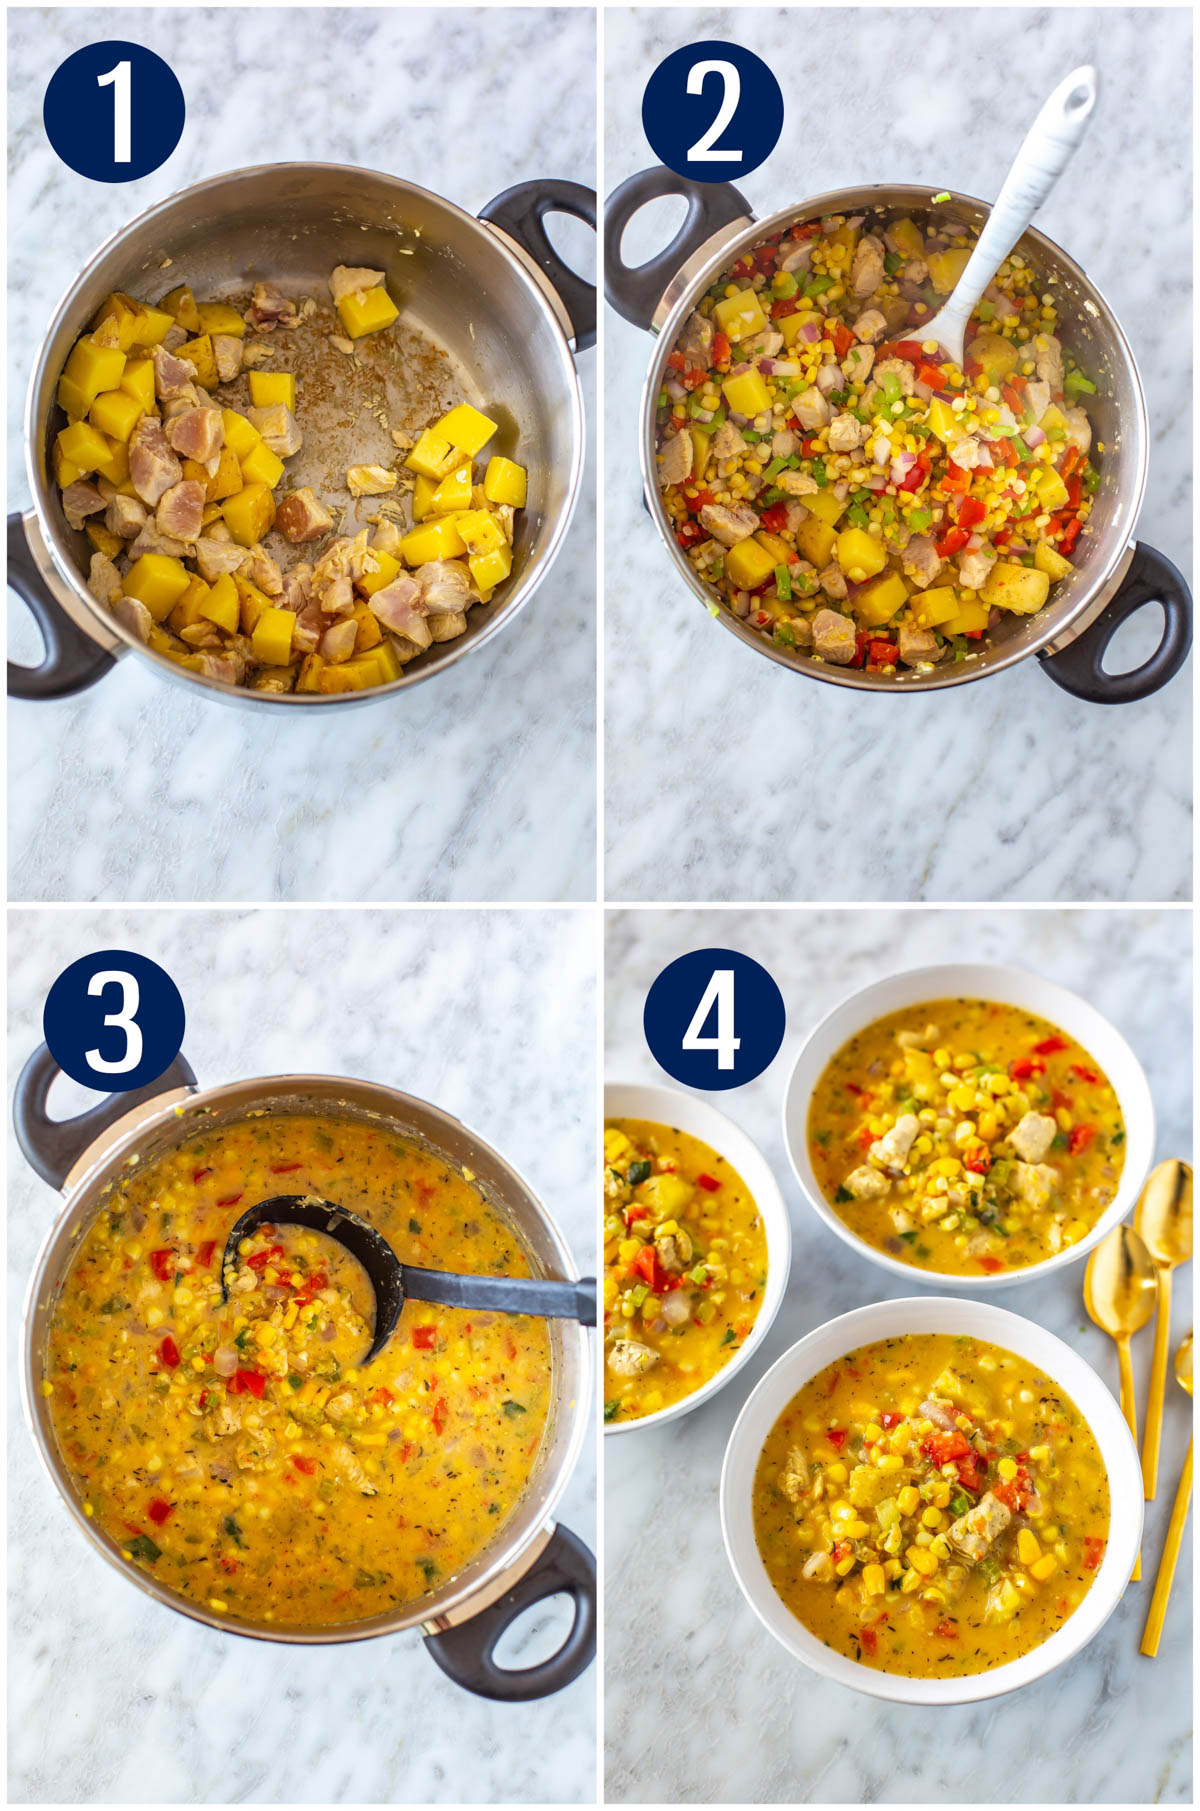 Step-by-step collage for making chicken corn chowder: cook potatoes and chicken, add veggies, add broth and cream, stir and serve.